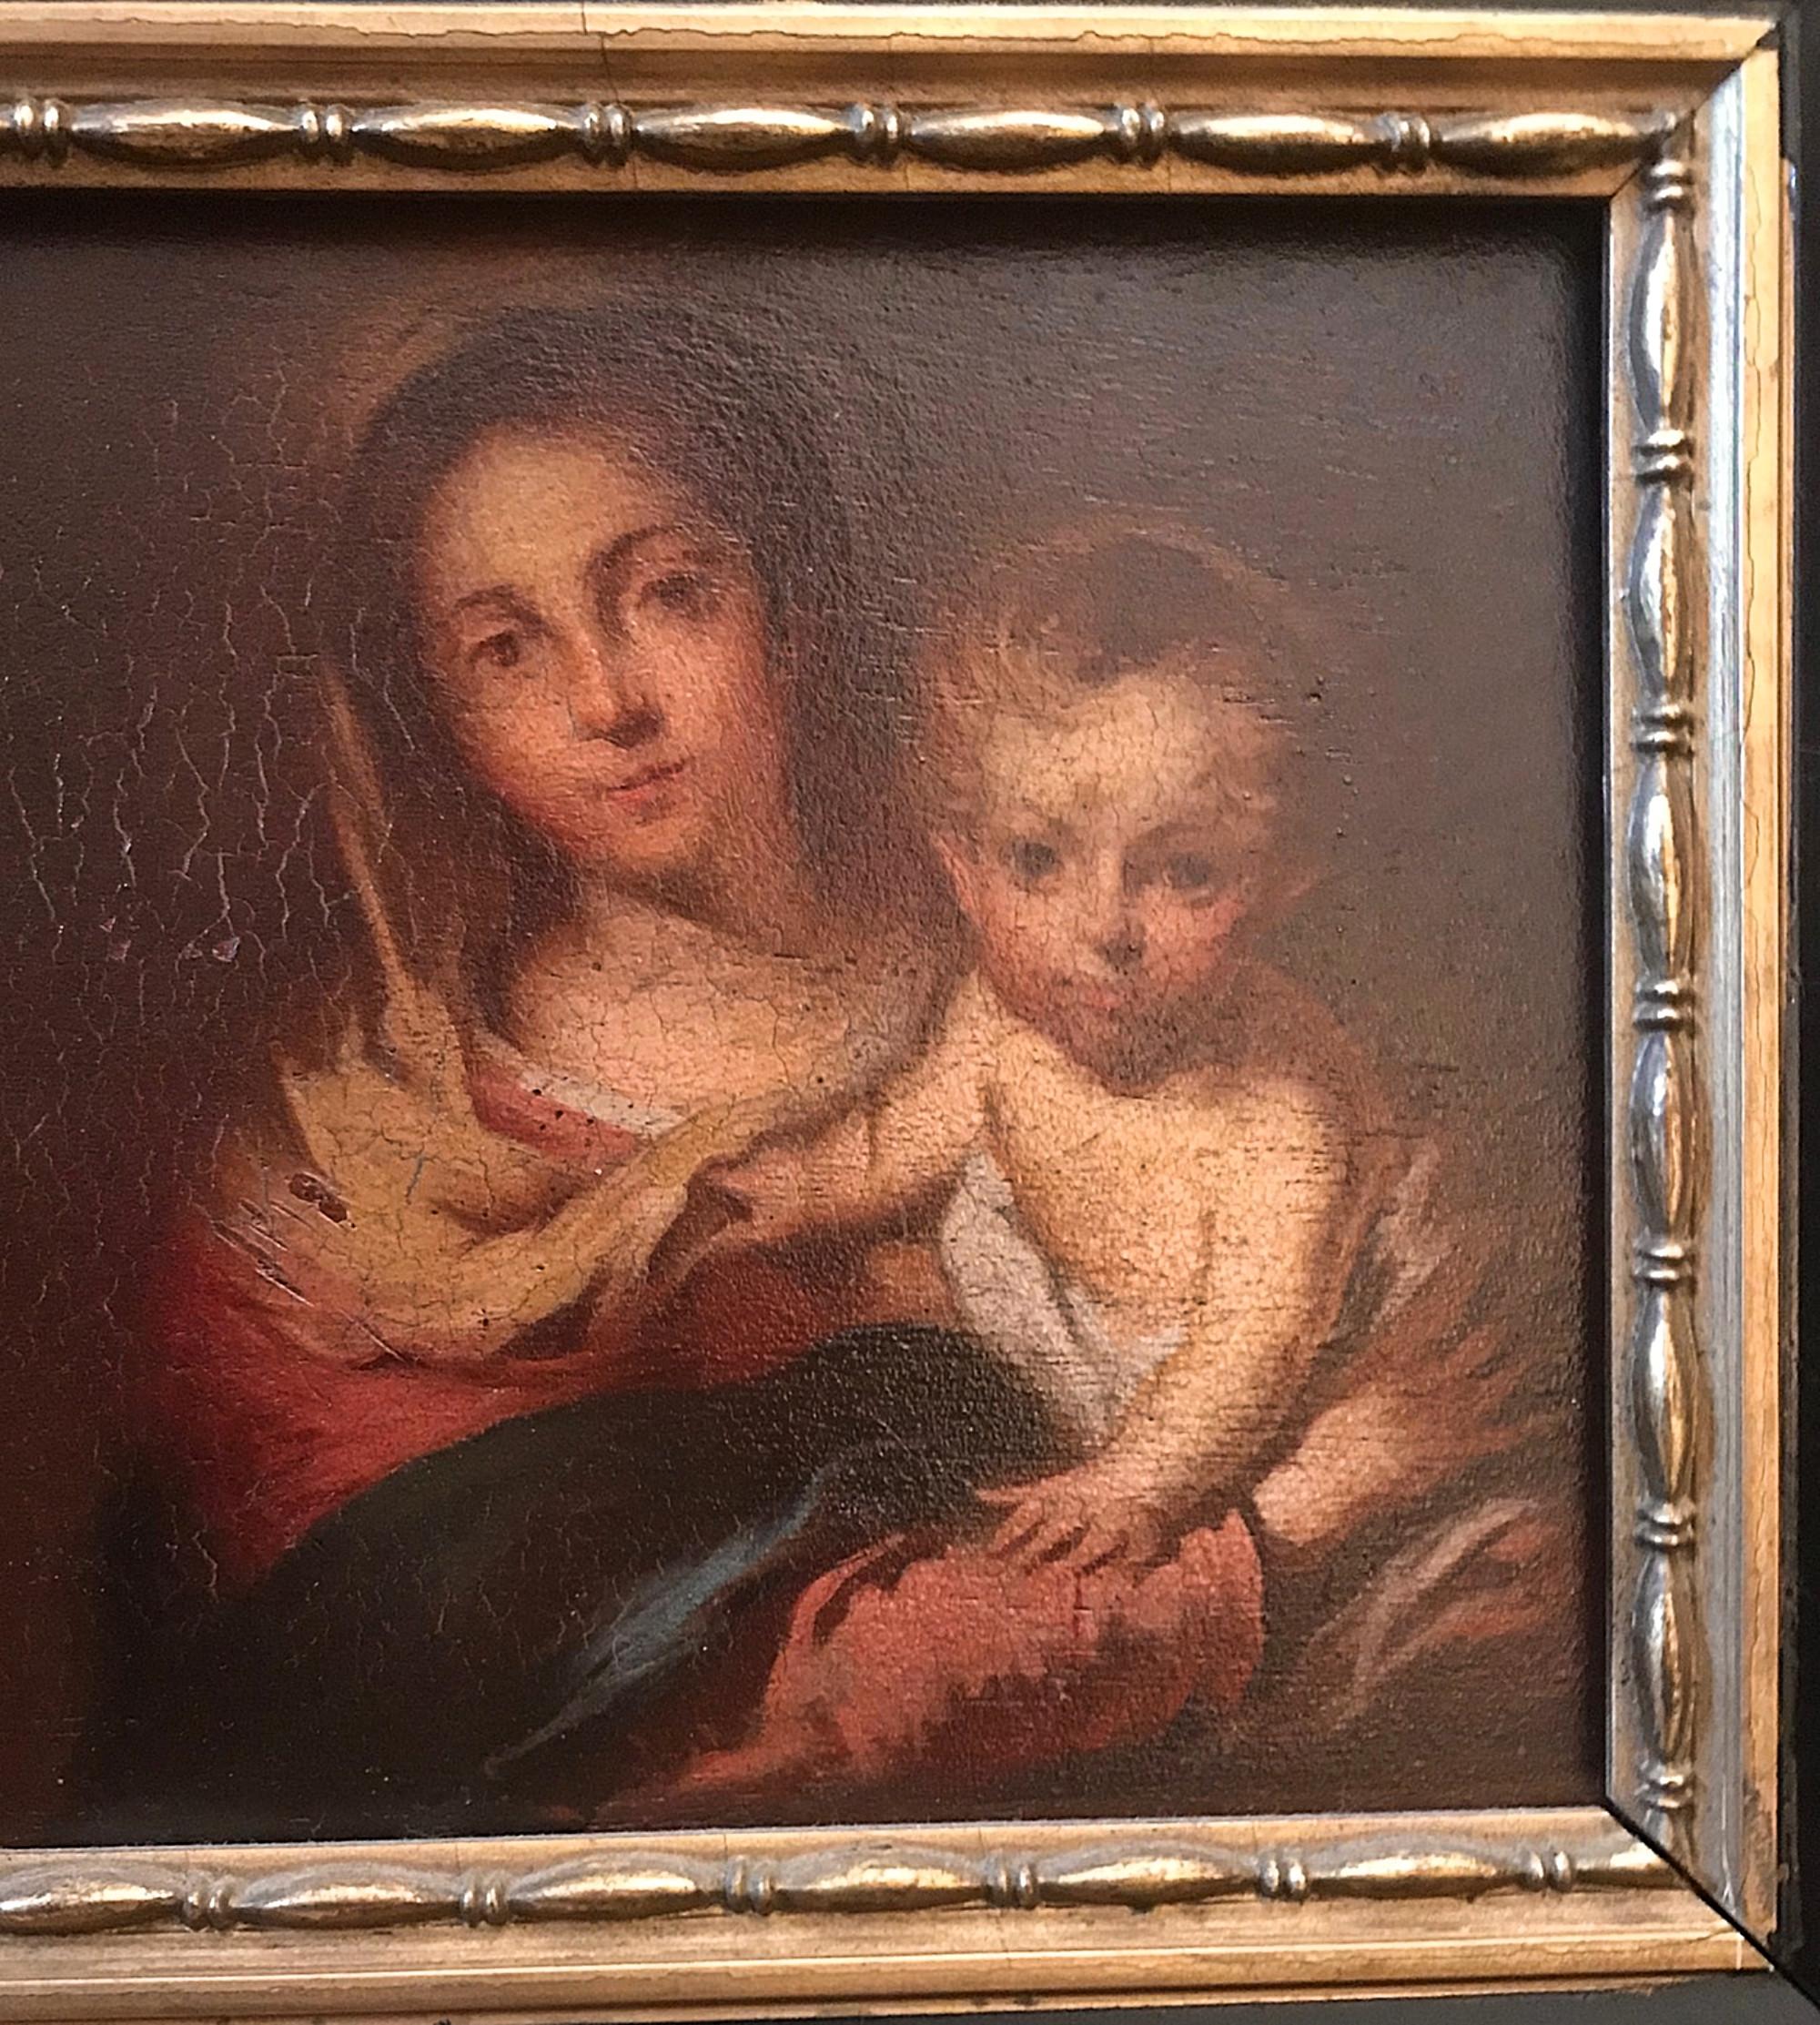 Spanish Antique Painting “Madonna with a Napkin” after Bartolome Esteban Murillo, 1666 For Sale